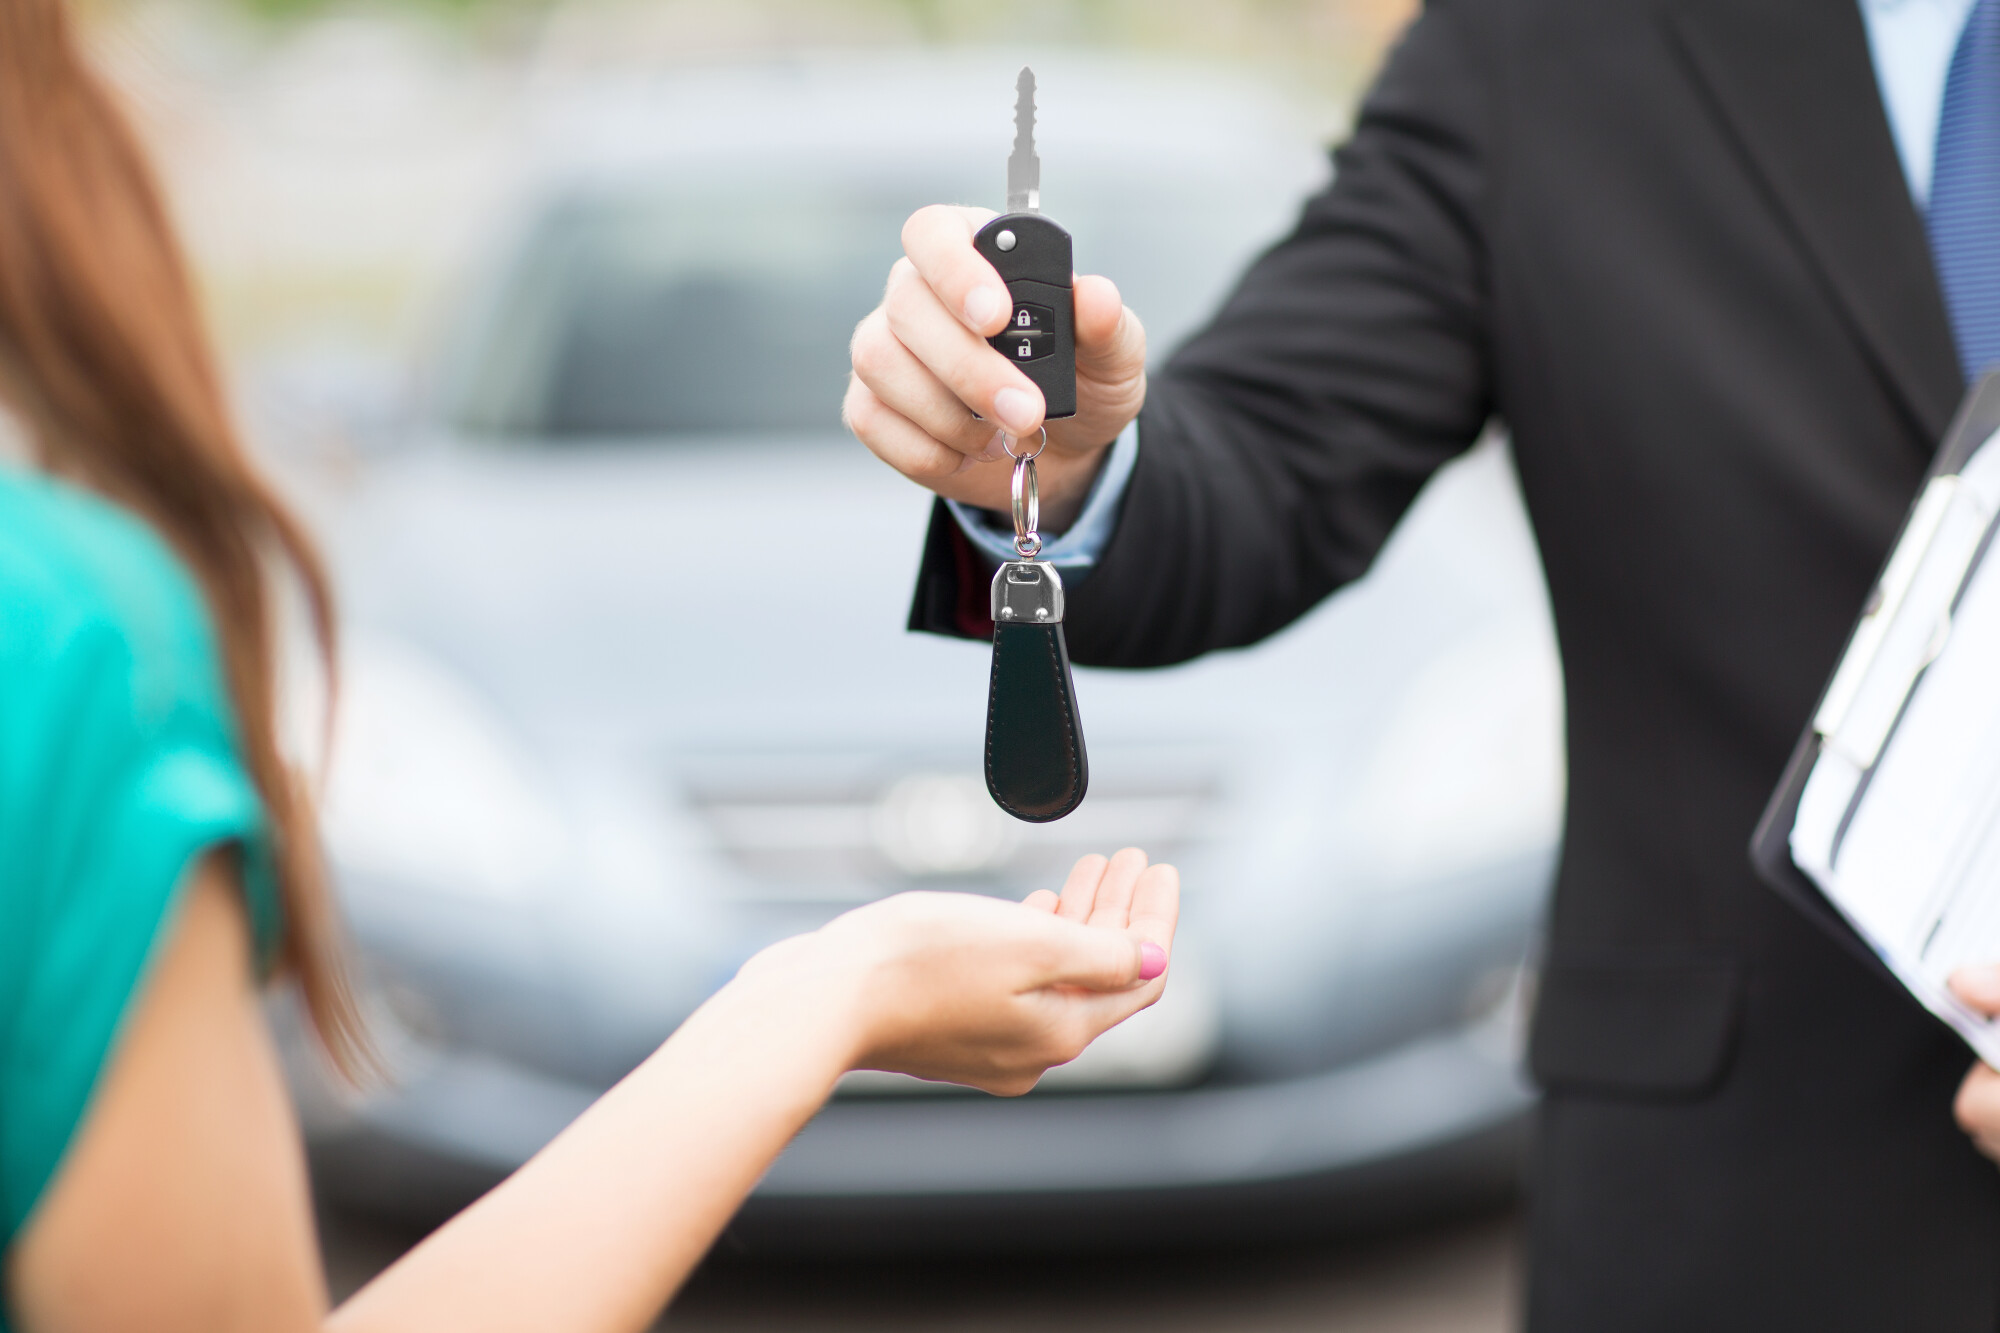 How Do You Get a Bad Credit Car Loan?